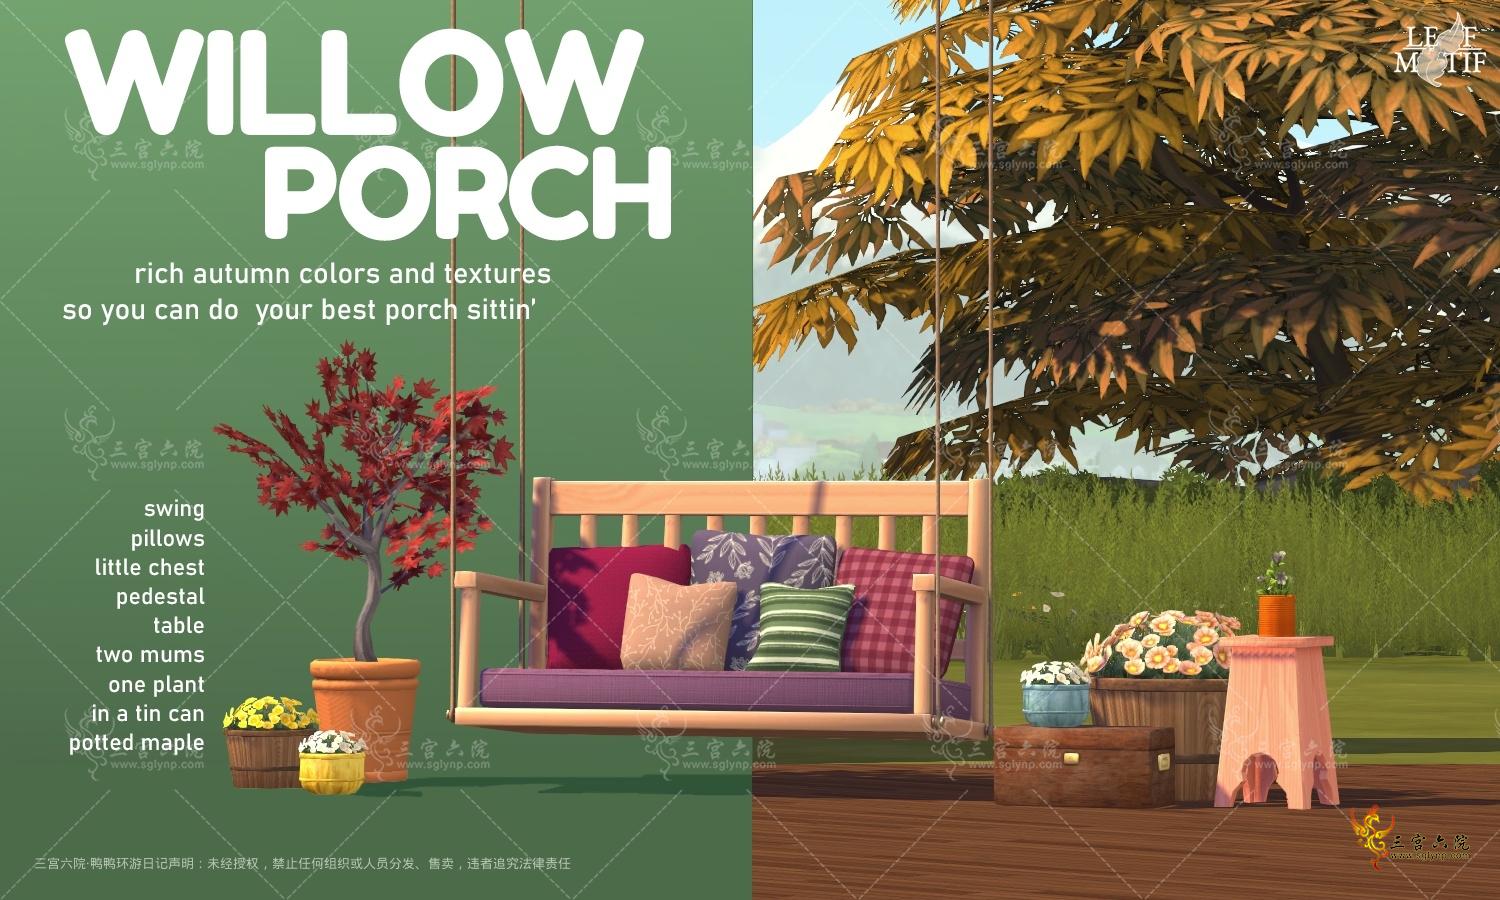 willowporchpreview1.png